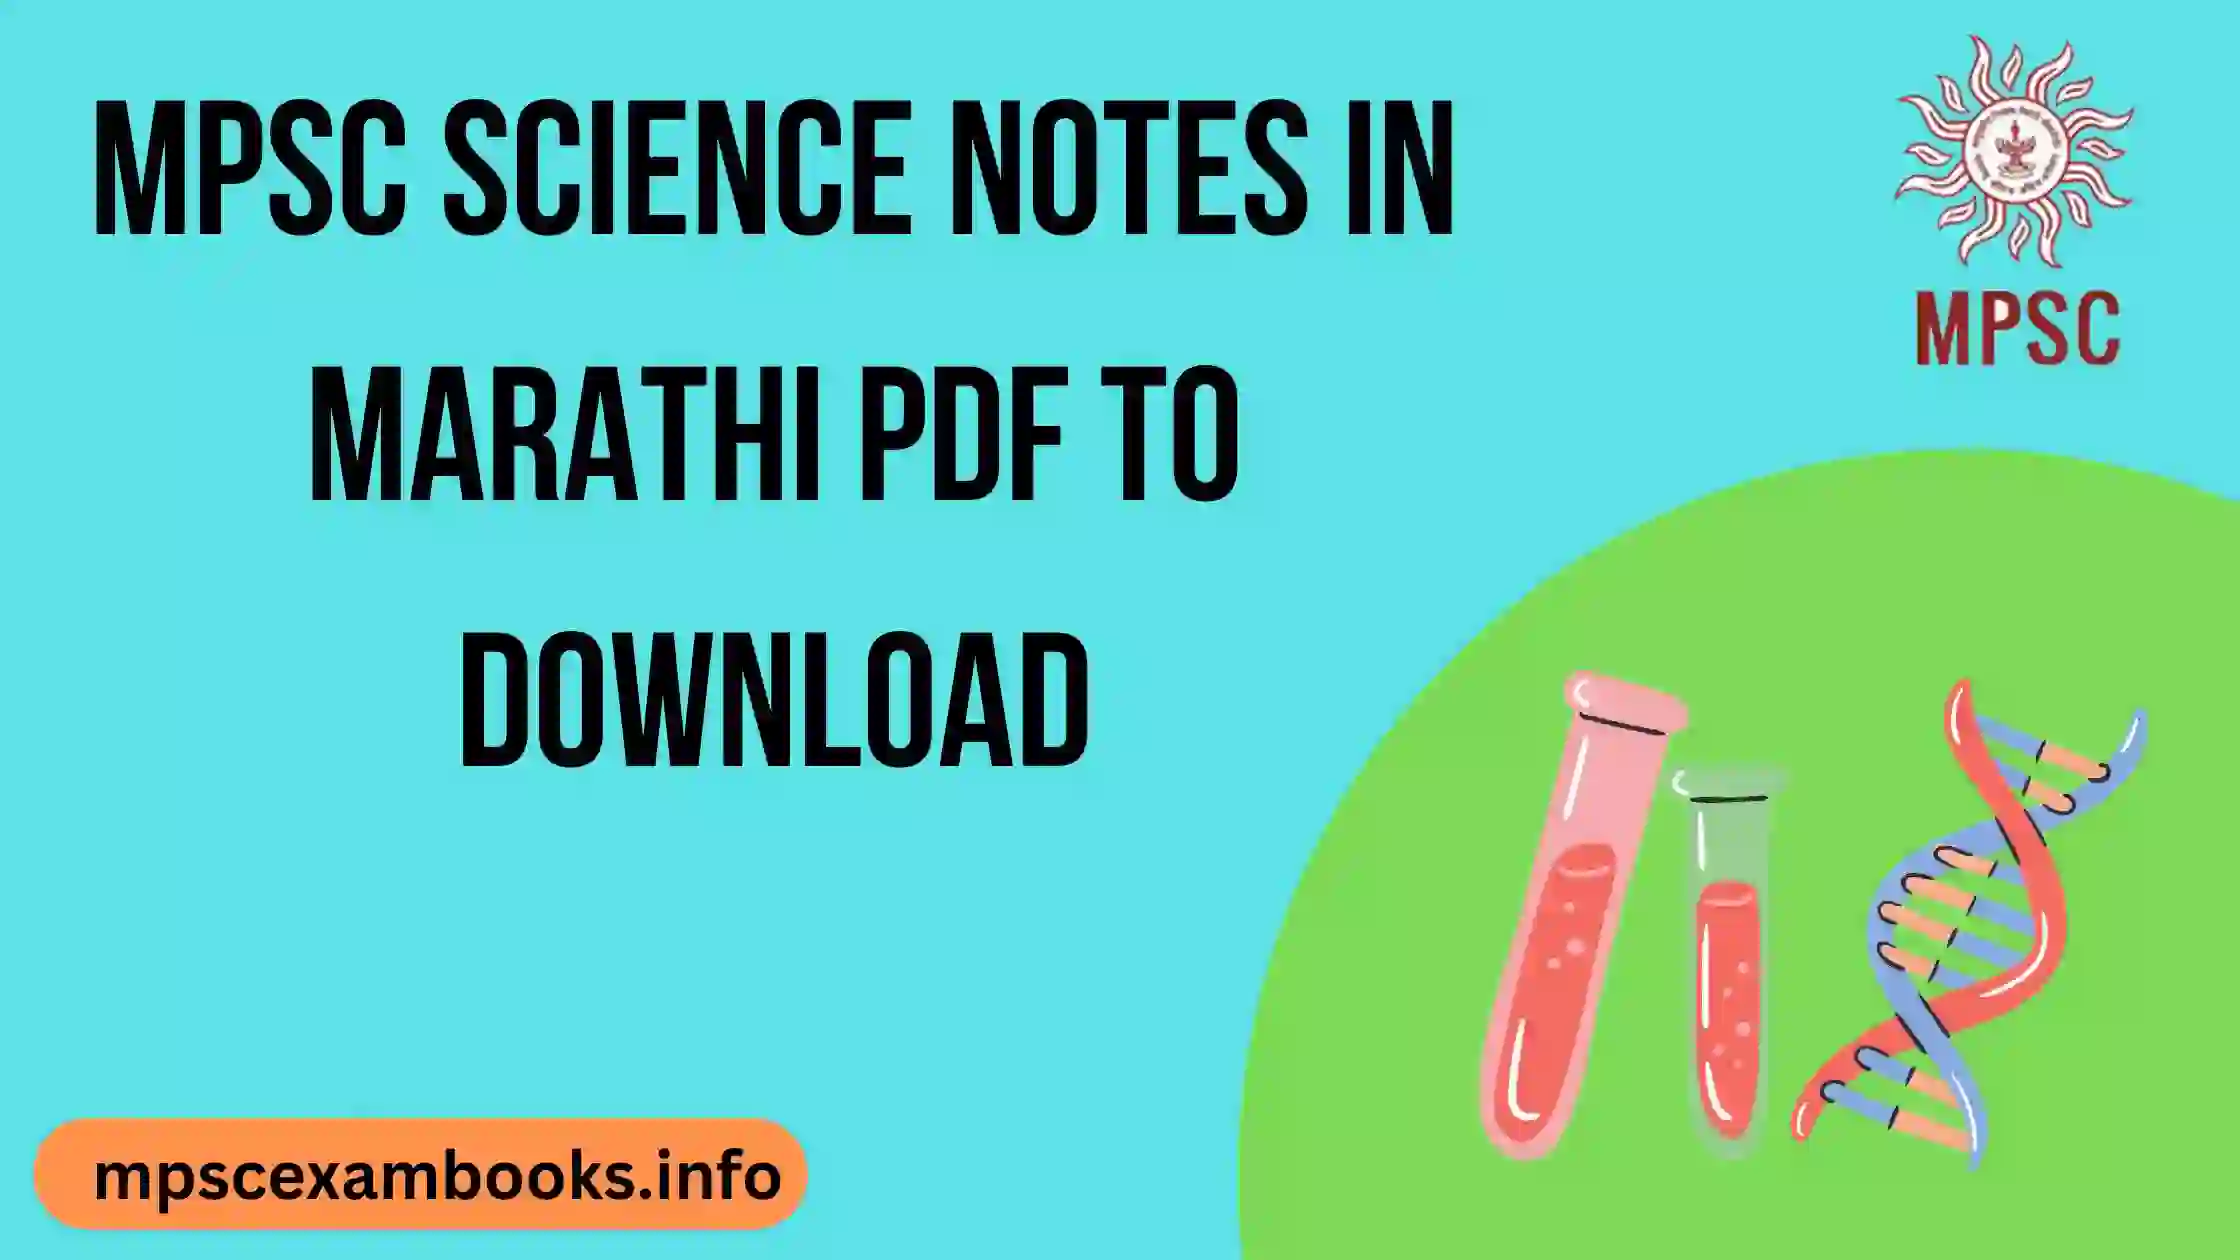 MPSC Science Notes in Marathi pdf to Download